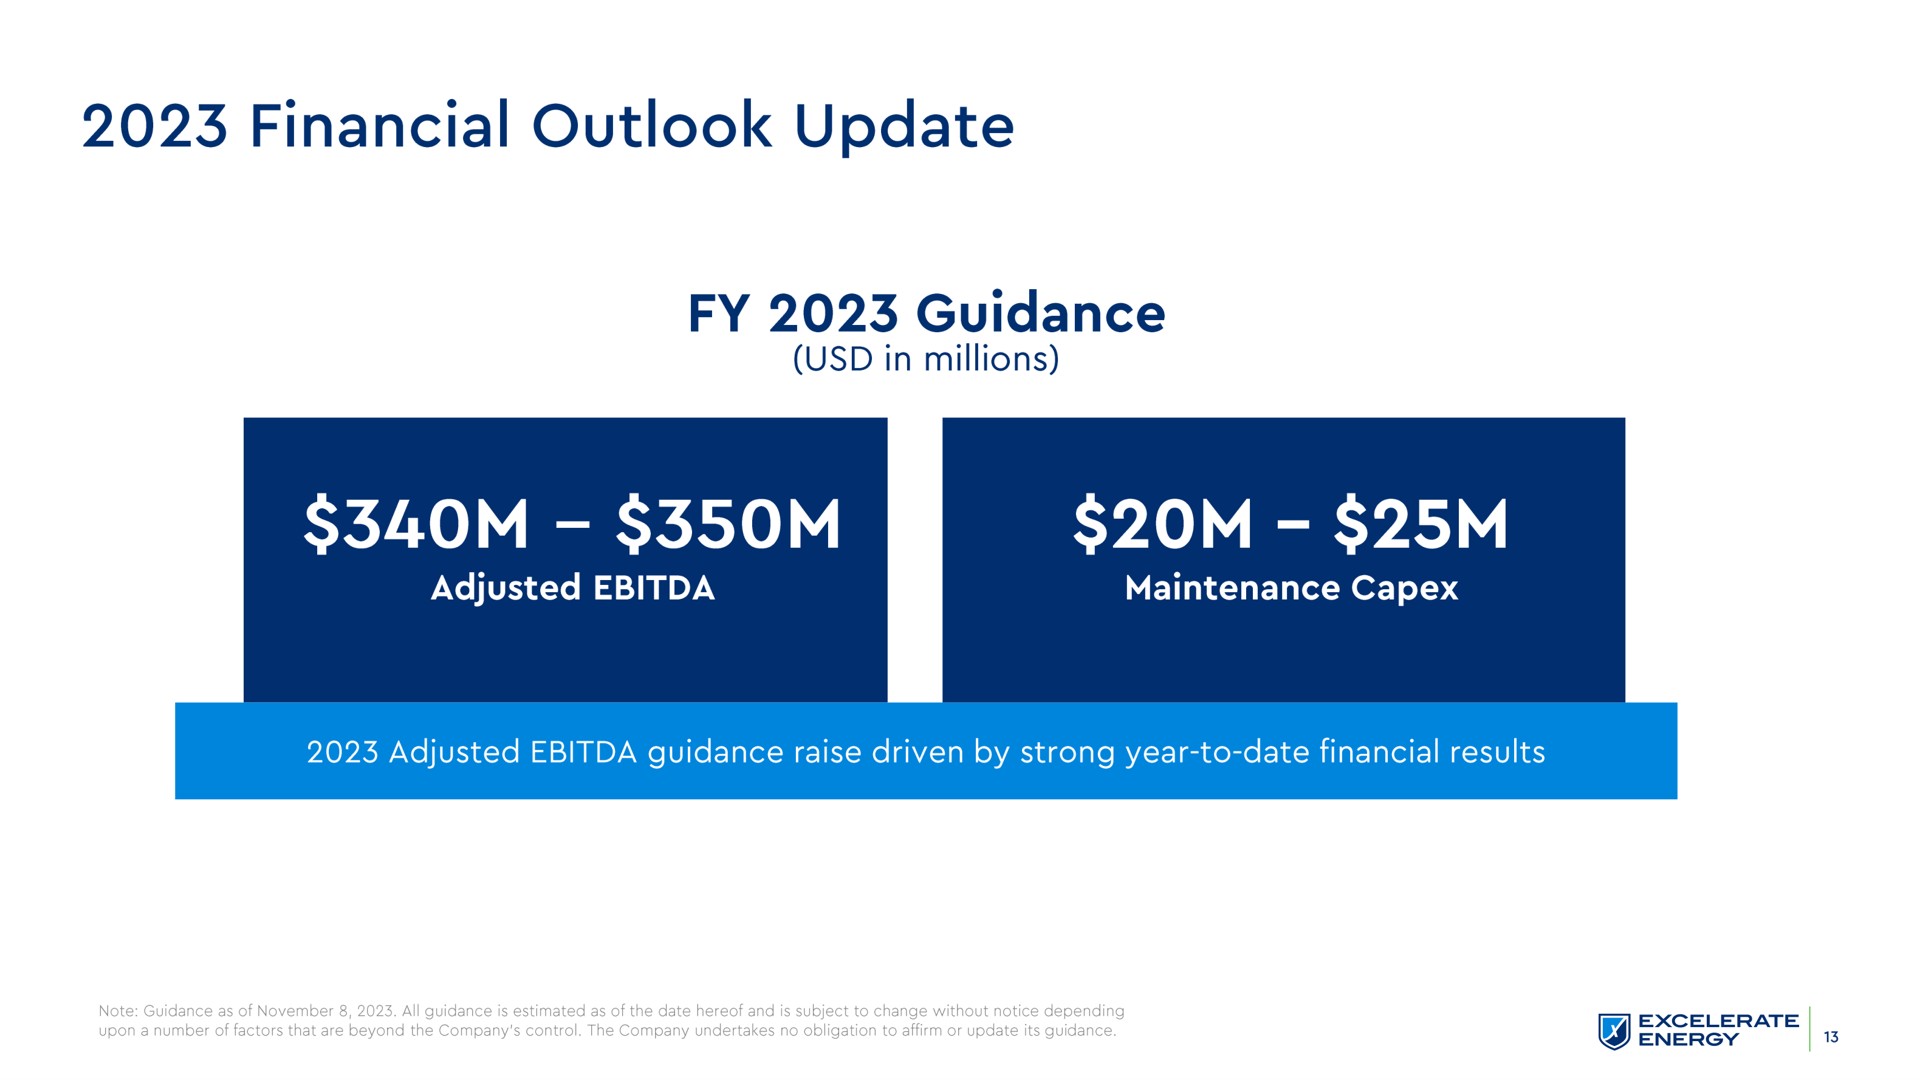 financial outlook update guidance | Excelerate Energy